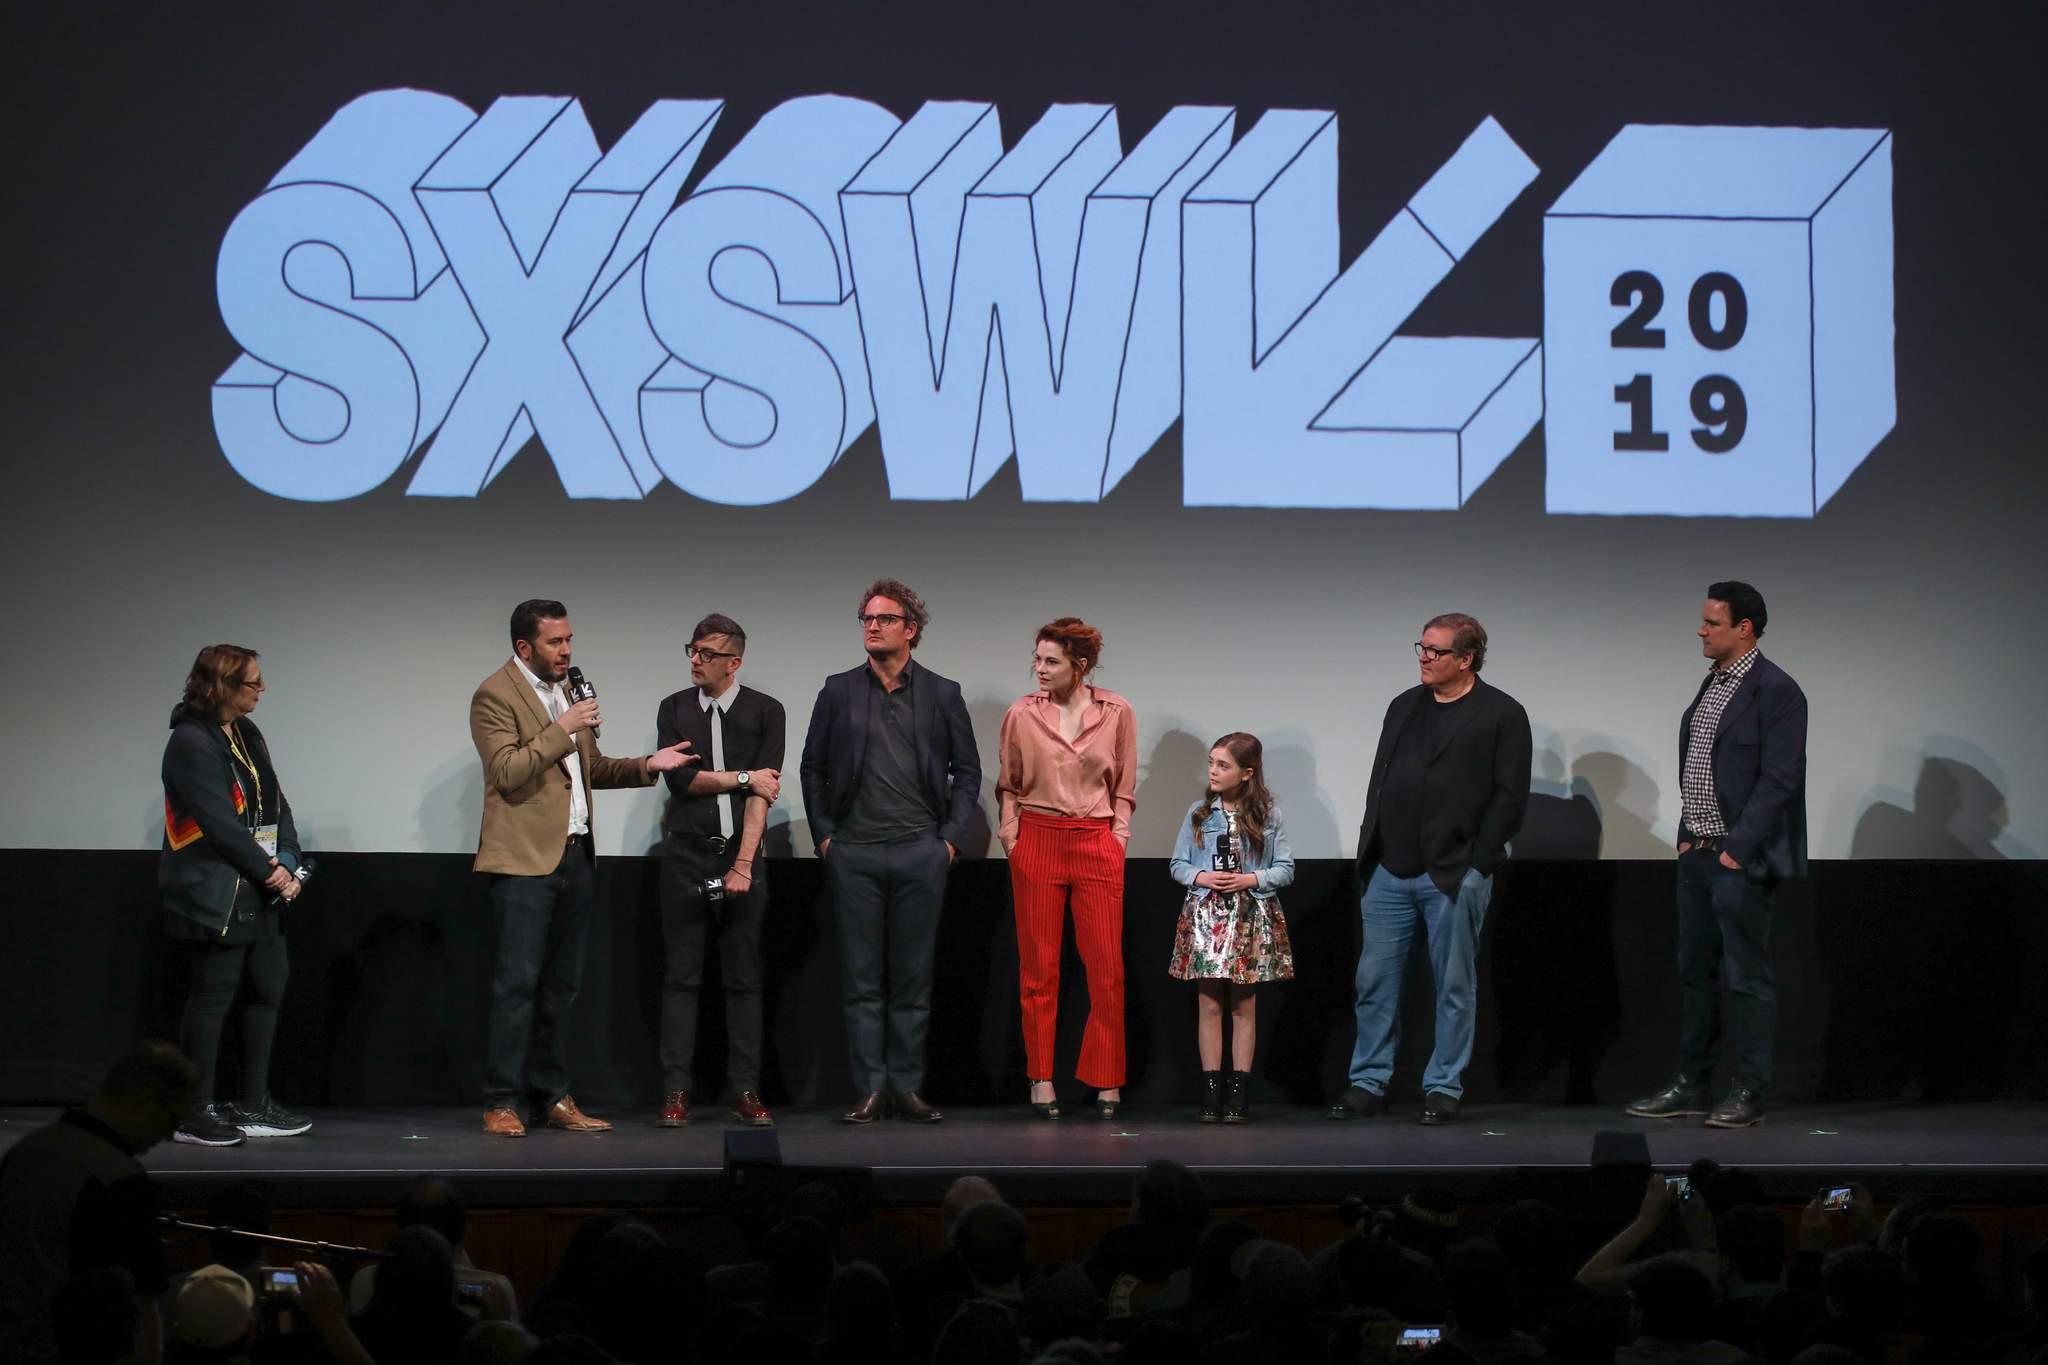 SXSW says it will return to in-person events in 2022, announces dates